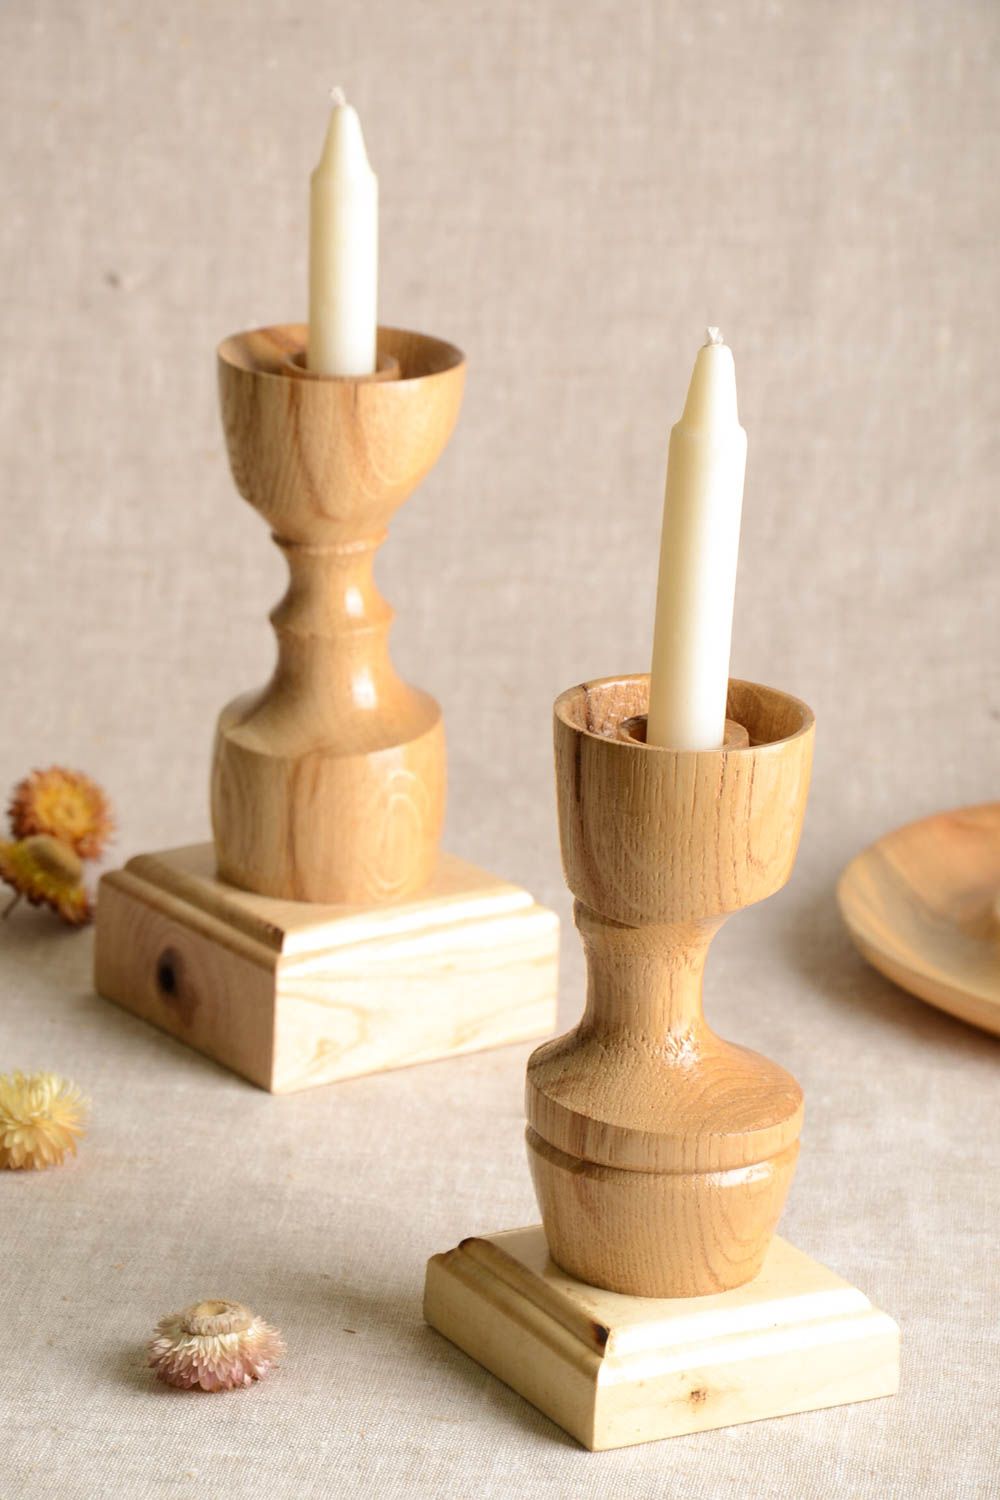 Unusual handmade wooden candlesticks 2 pieces candle holder design gift ideas photo 1